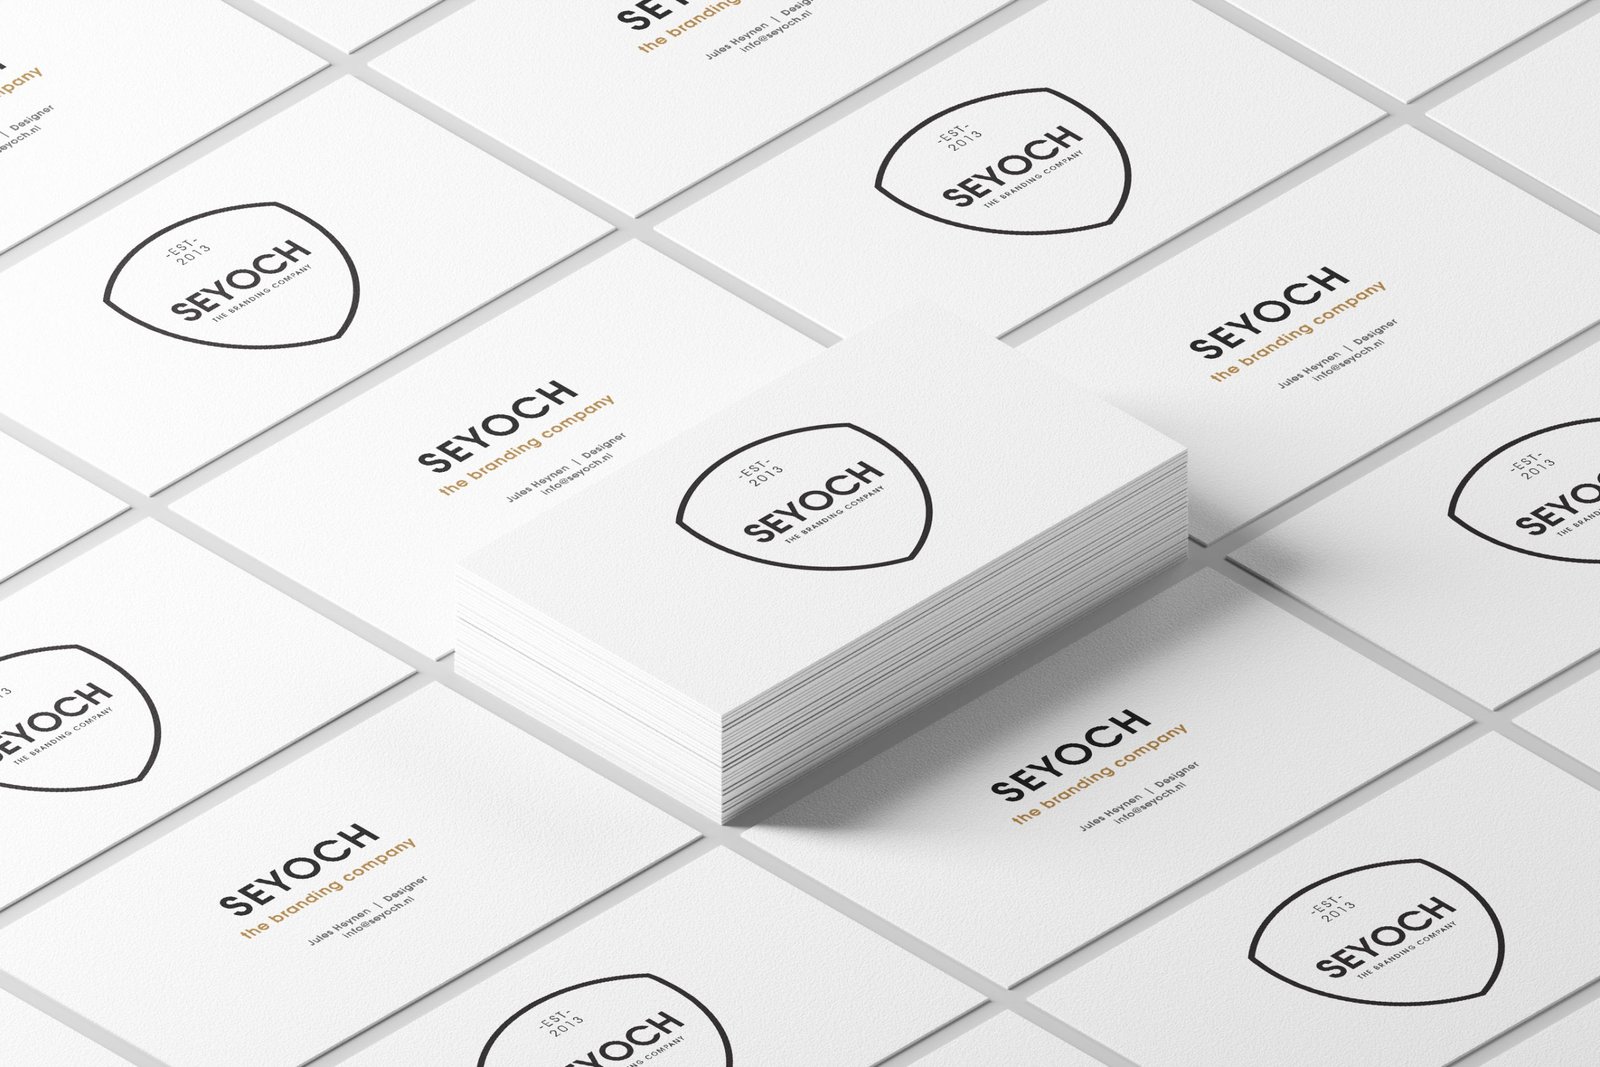 SEYOCH-White-Isometric-Business-Cards-scaled.jpg